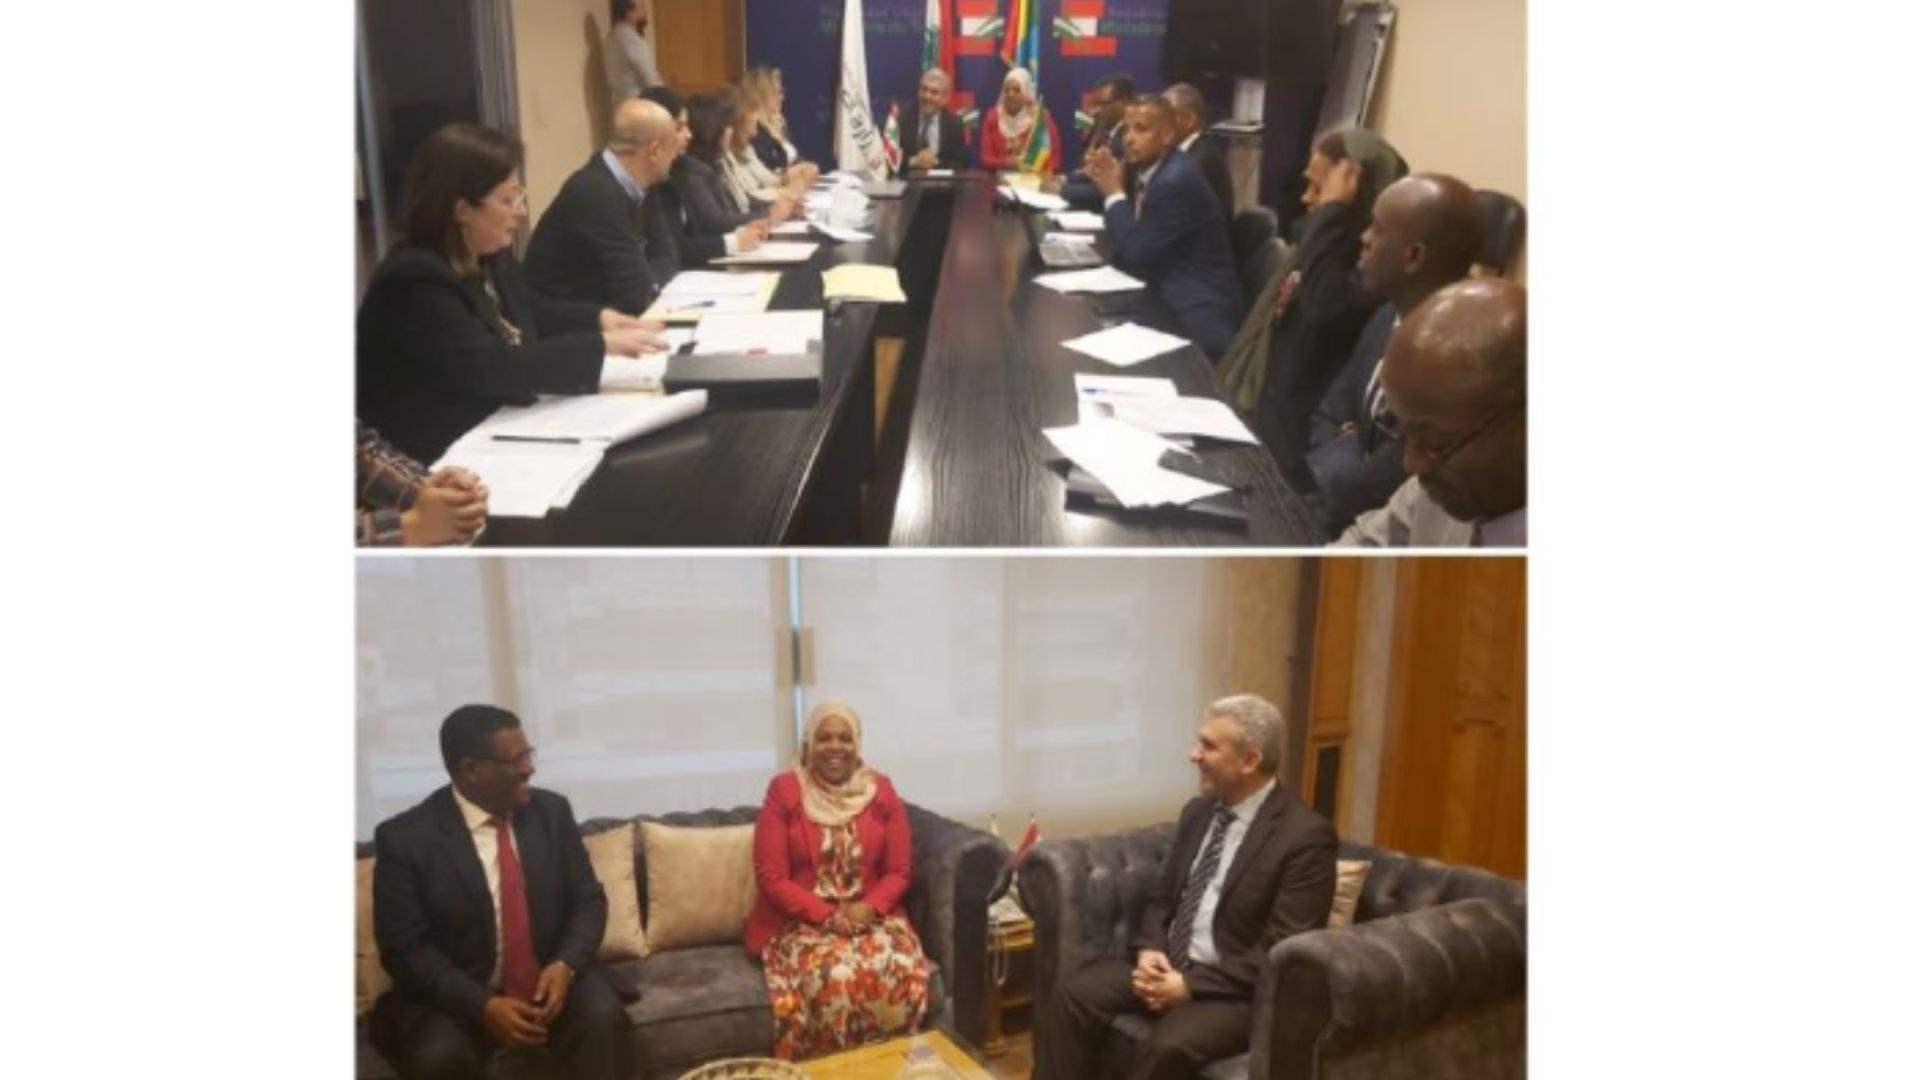 Labor Minister discusses employment, signing agreement between Ethiopia, Lebanon